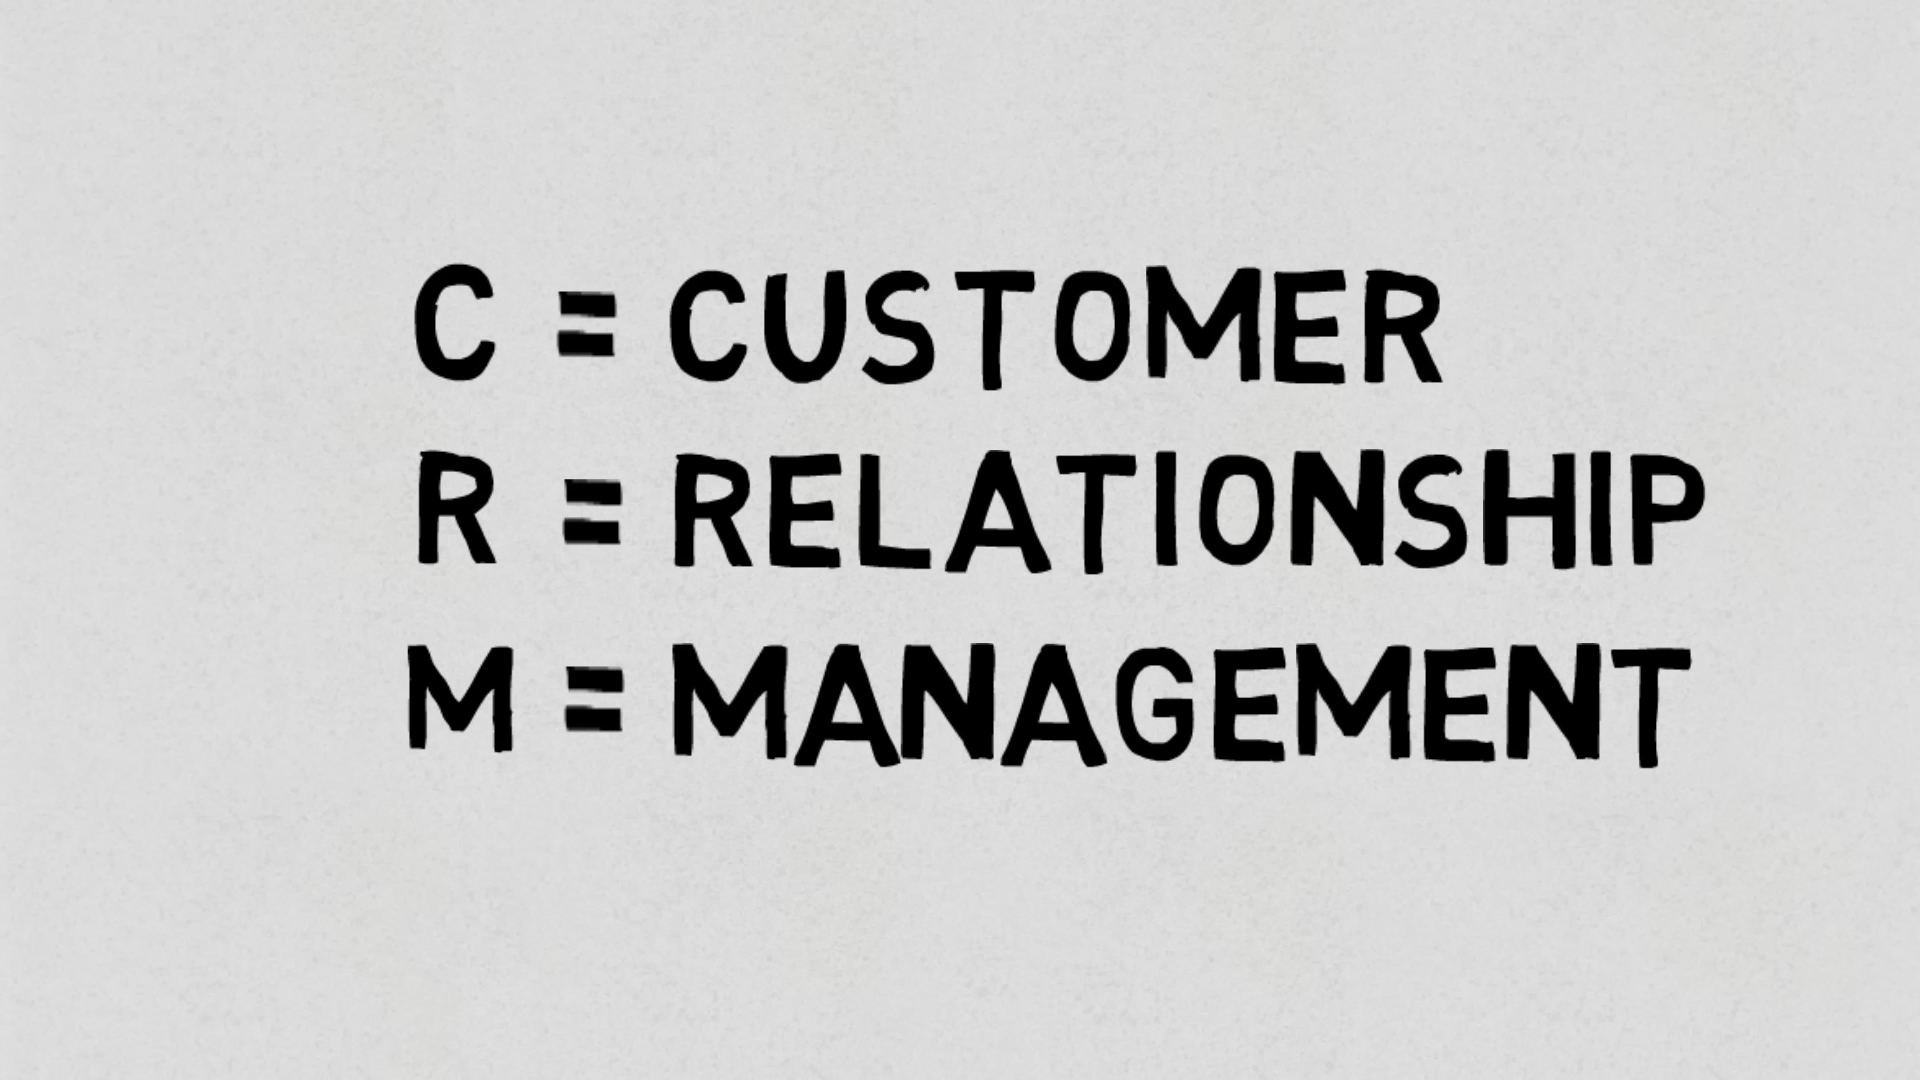 Top-7-Benefits-of-CRM-Systems-Boost-Your-Customer-Satisfaction-and-Loyalty-Learn-Digital-Marketing.jpg